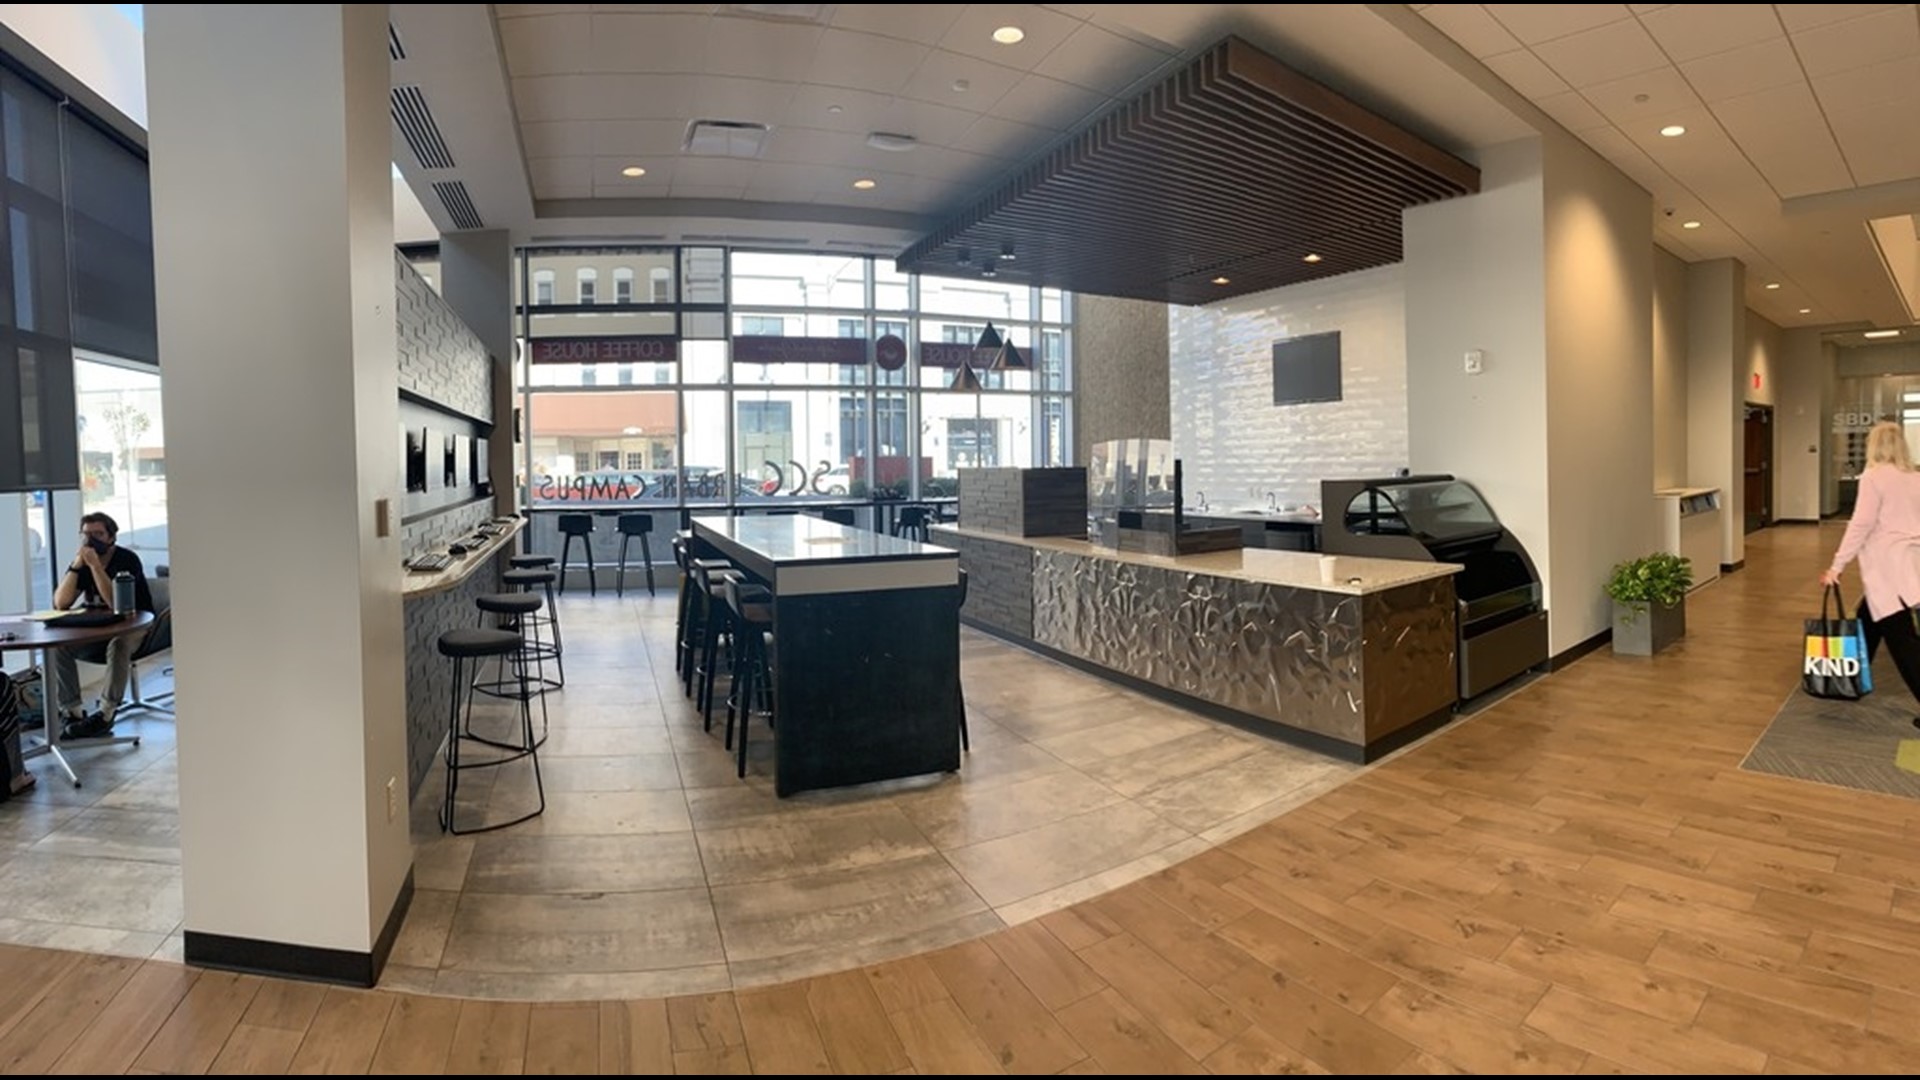 The coffee shop is opening its 2nd location inside Scott Community College's Urban Campus in downtown Davenport